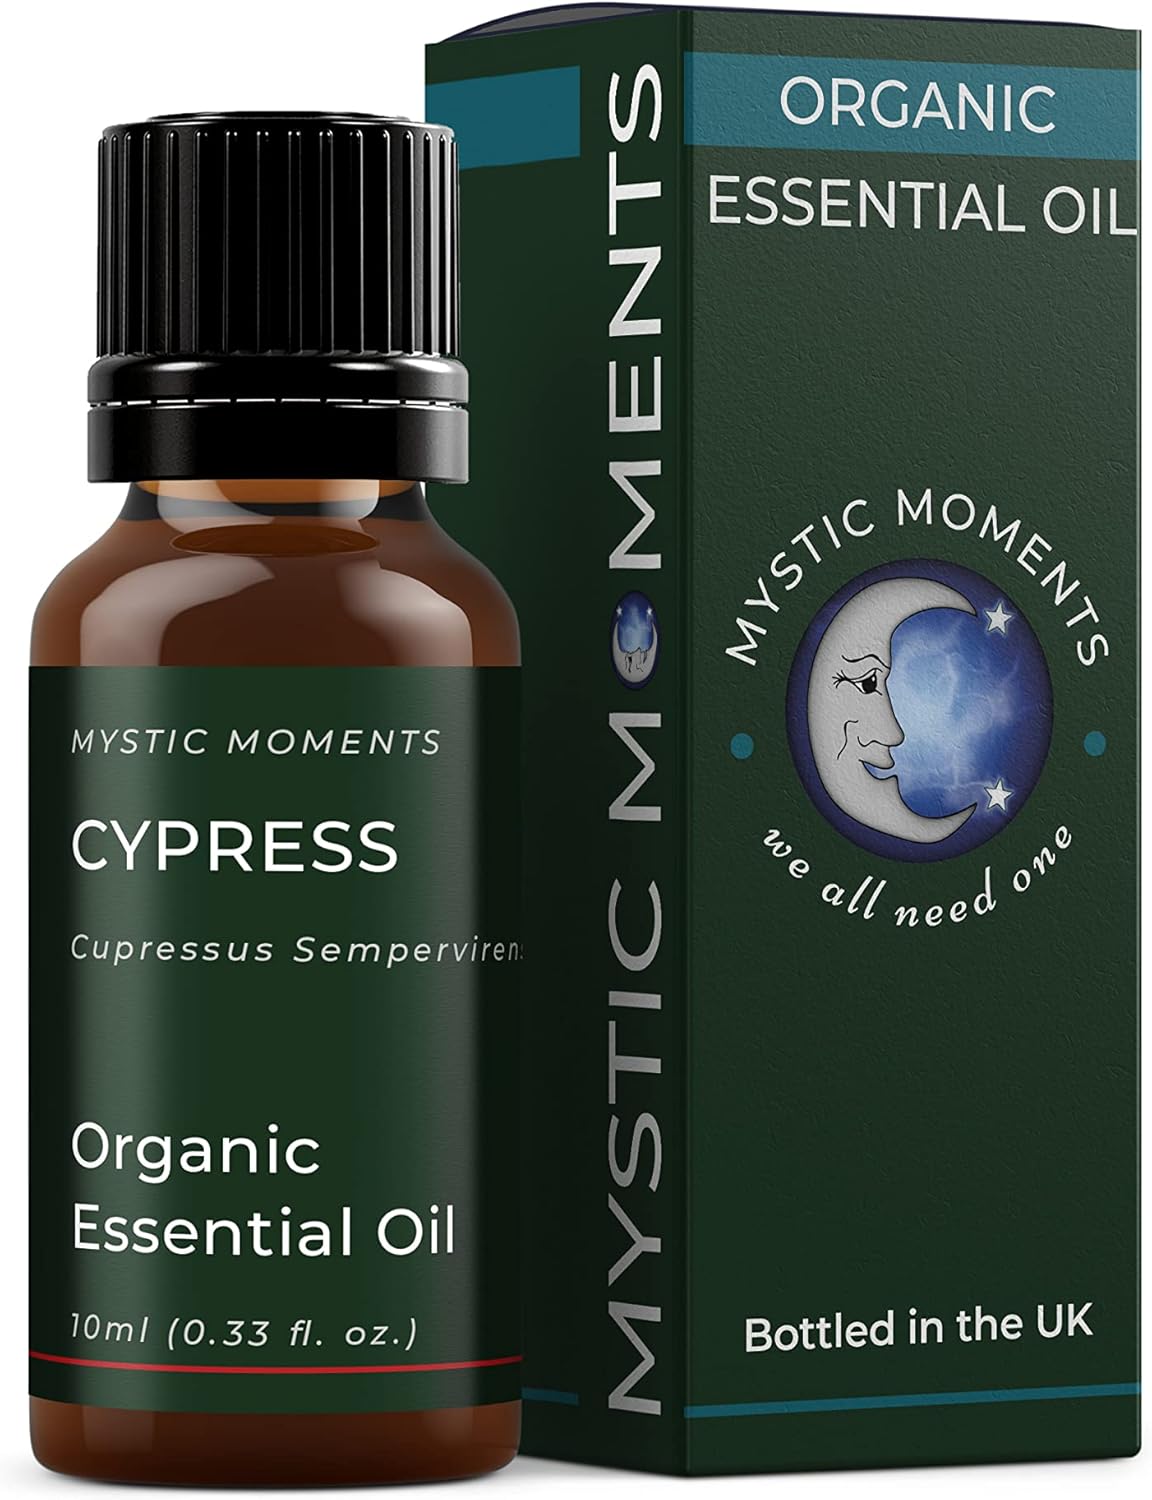 Mystic Moments | Organic Cypress Essential Oil 10ml - Pure & Natural oil for Diffusers, Aromatherapy & Massage Blends Vegan GMO Free